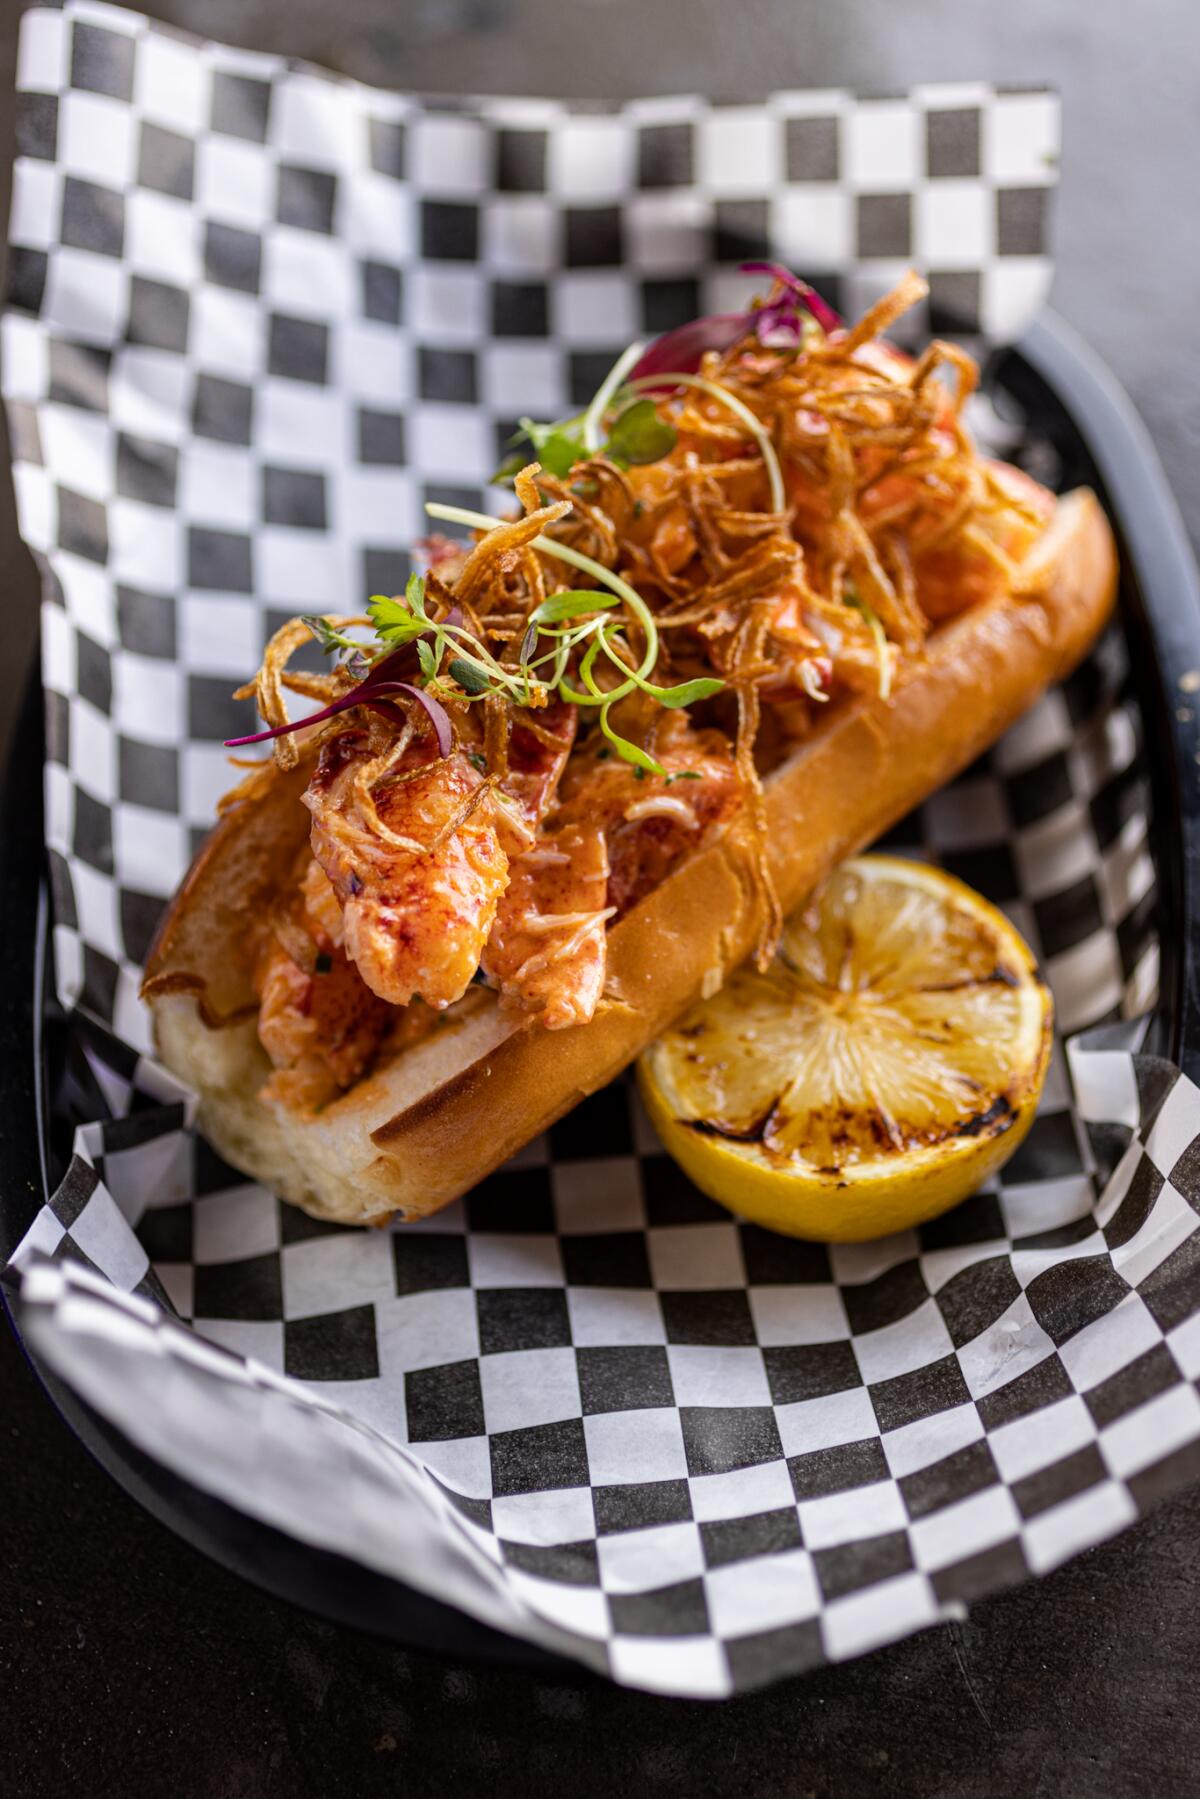 Gourmet Hot Dog Eatery Coming to College Park